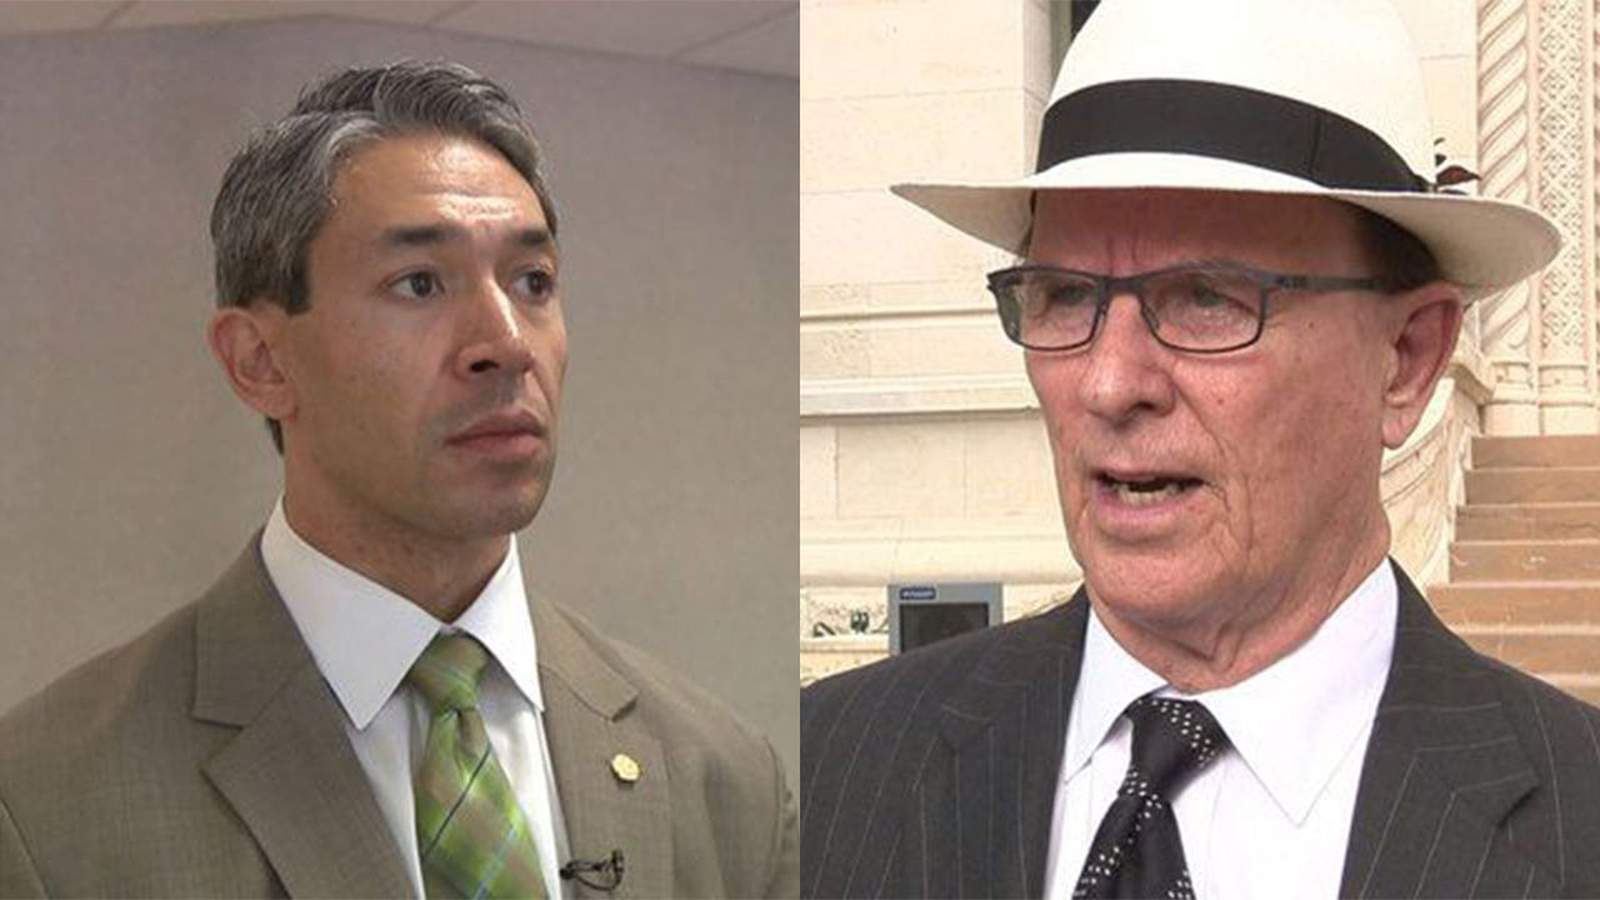 Mayor Nirenberg, Judge Wolff asking Governor Abbott for more authority over local regulations